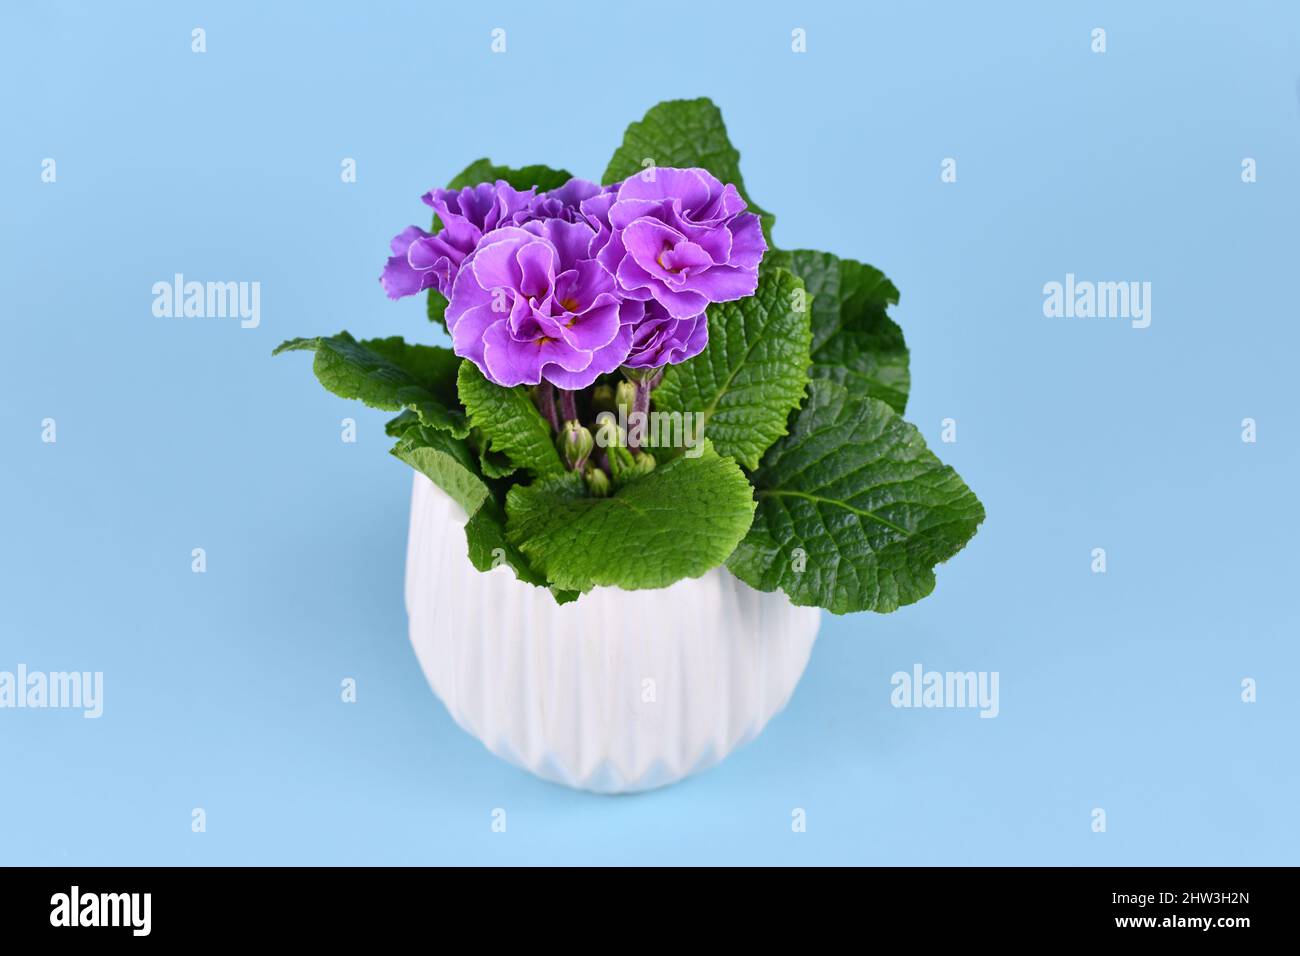 Violet double primrose in white flower pot on blue background Stock Photo